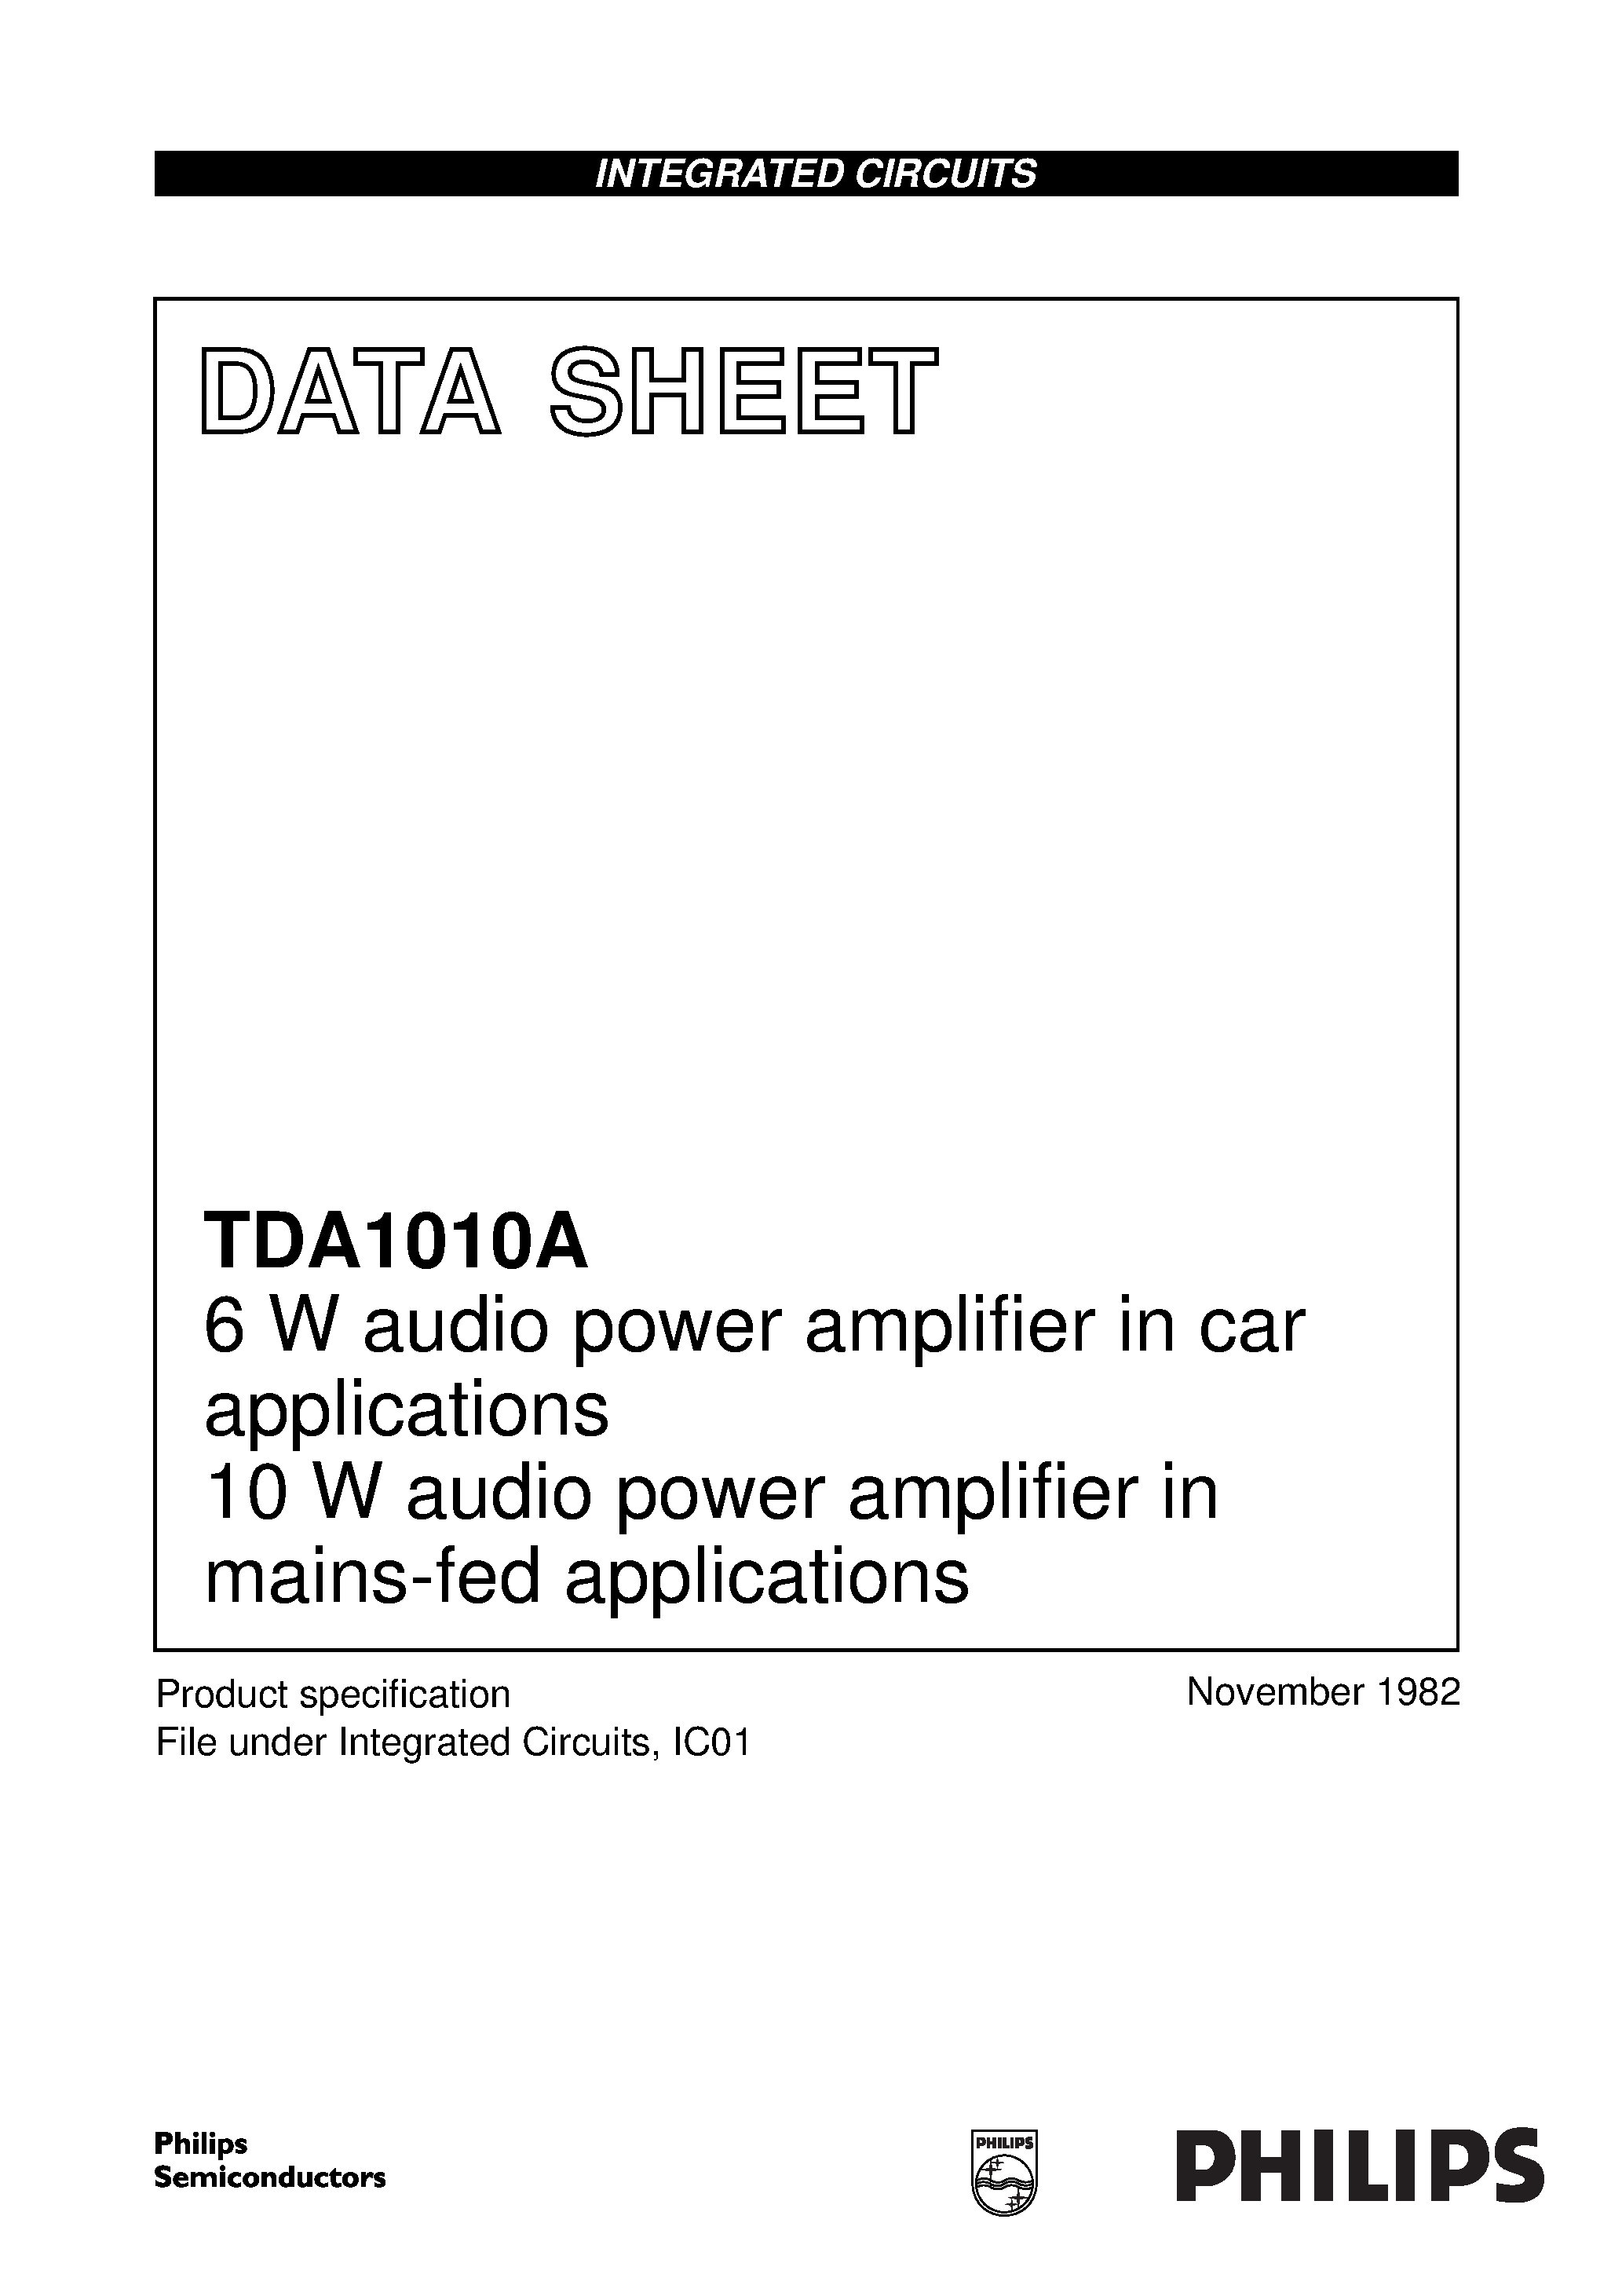 Datasheet TDA1010A - 6 W audio power amplifier in car applications 10 W audio power amplifier in mains-fed applications page 1